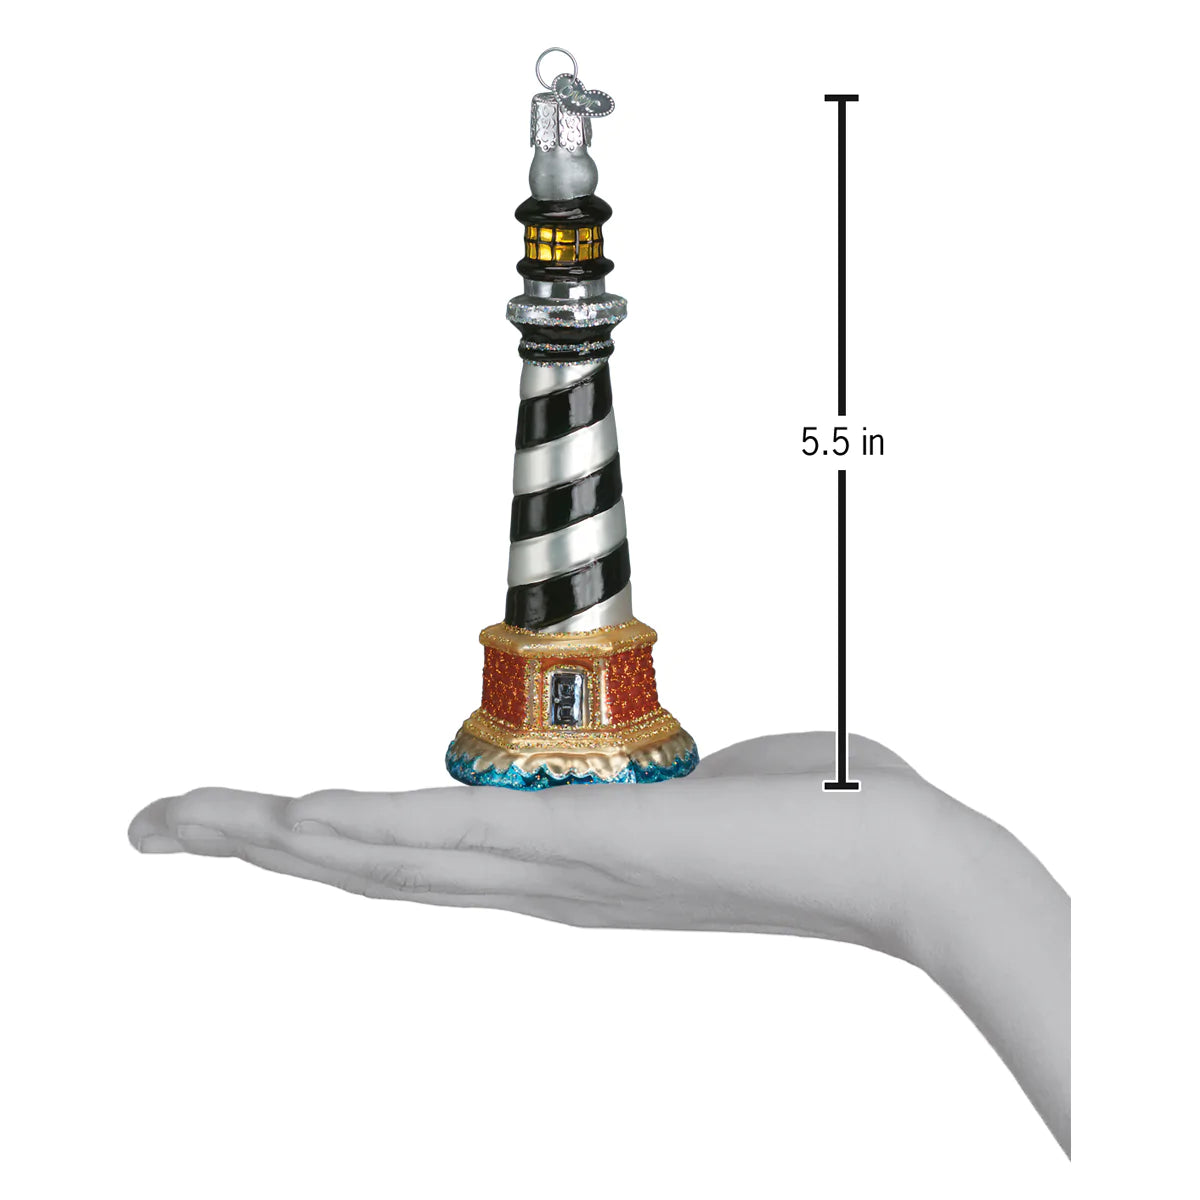 Cape Hatteras Lighthouse Ornament  Old World Christmas   